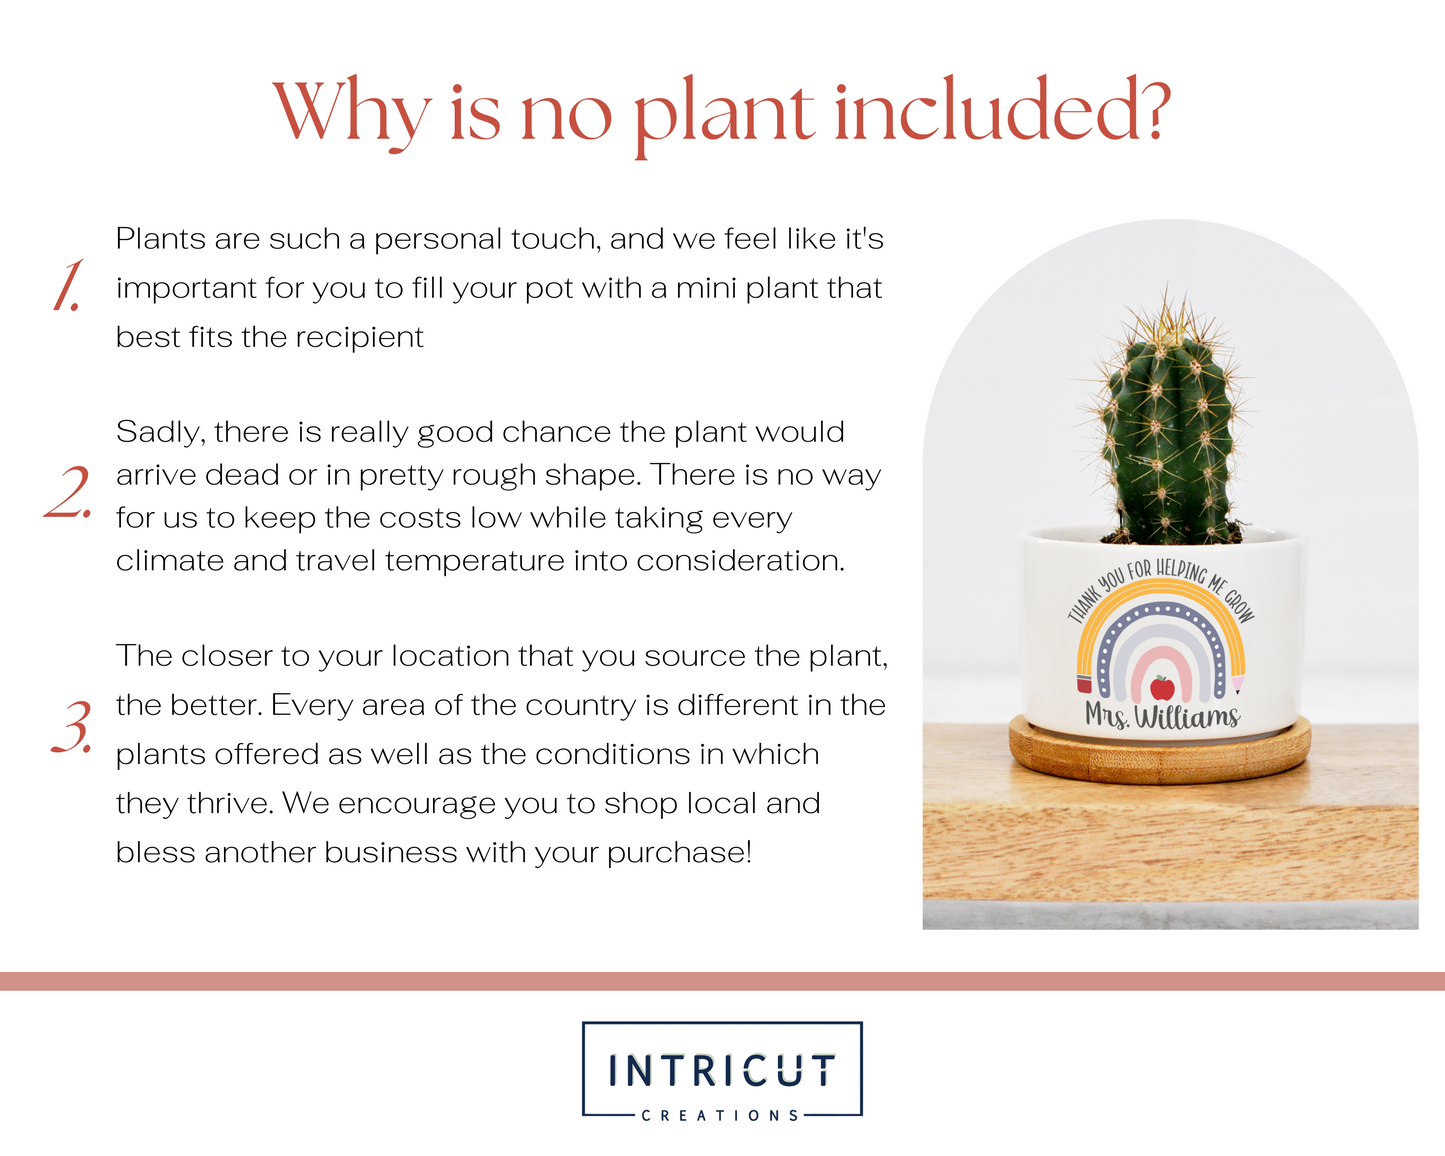 why is no plant included? they would arrive dead or in rough shape, the closer you shop and source your plant the better. We encourage you to shop local and bless another business with your purchase